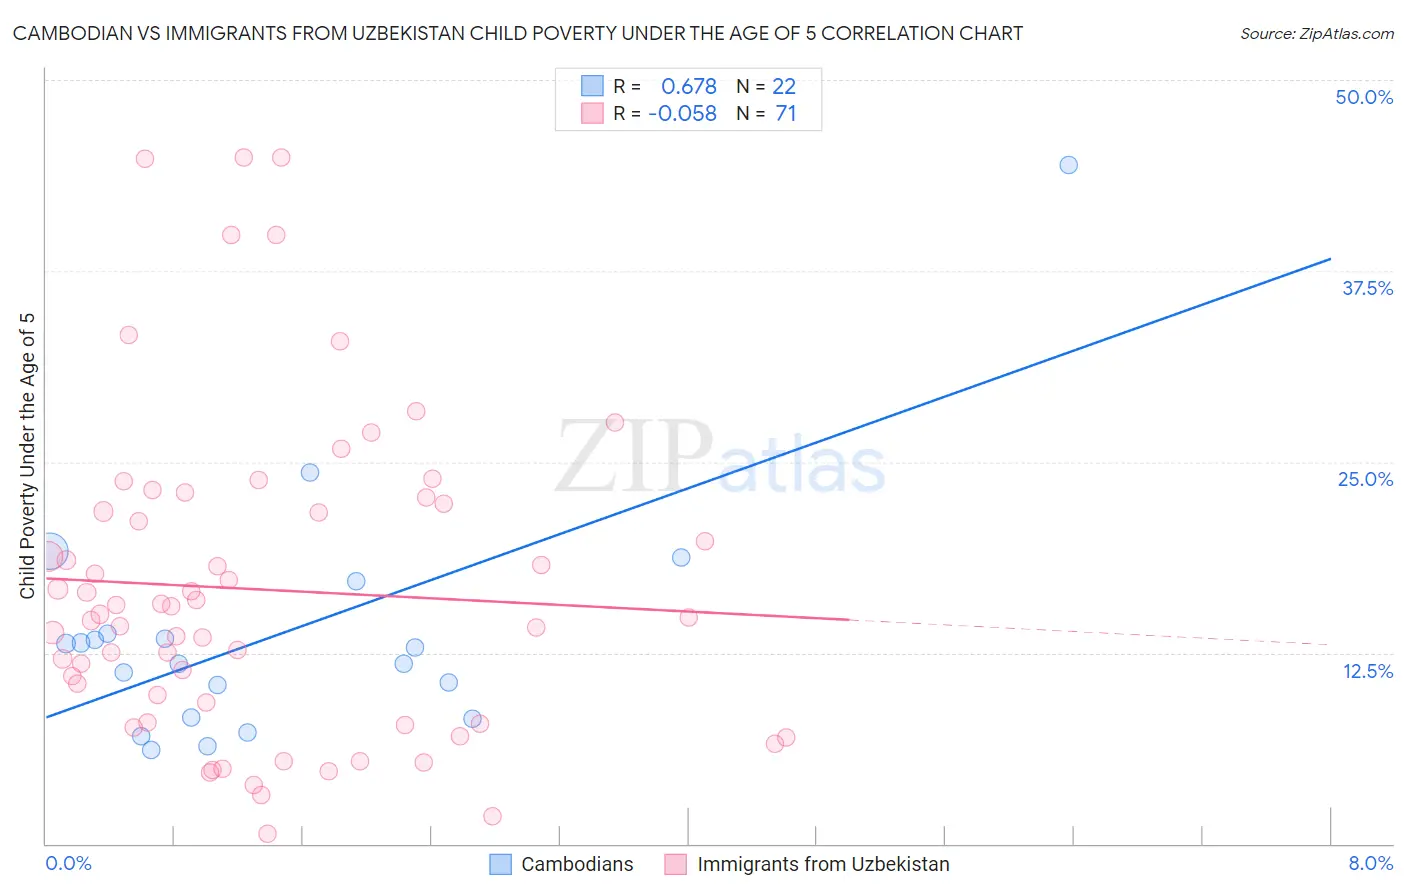 Cambodian vs Immigrants from Uzbekistan Child Poverty Under the Age of 5